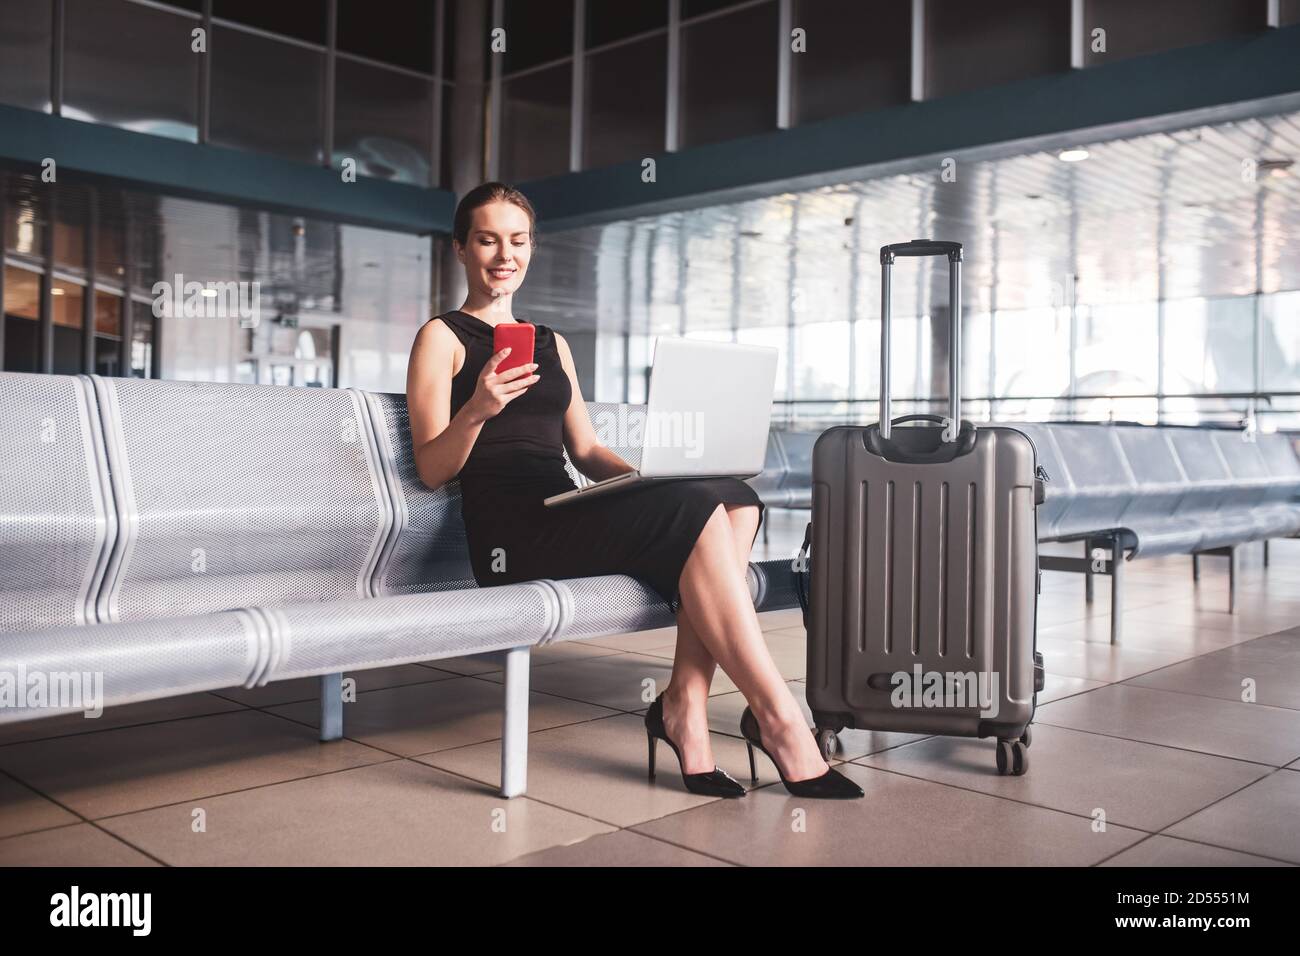 Business woman managing tasks while waiting for a flight Stock Photo